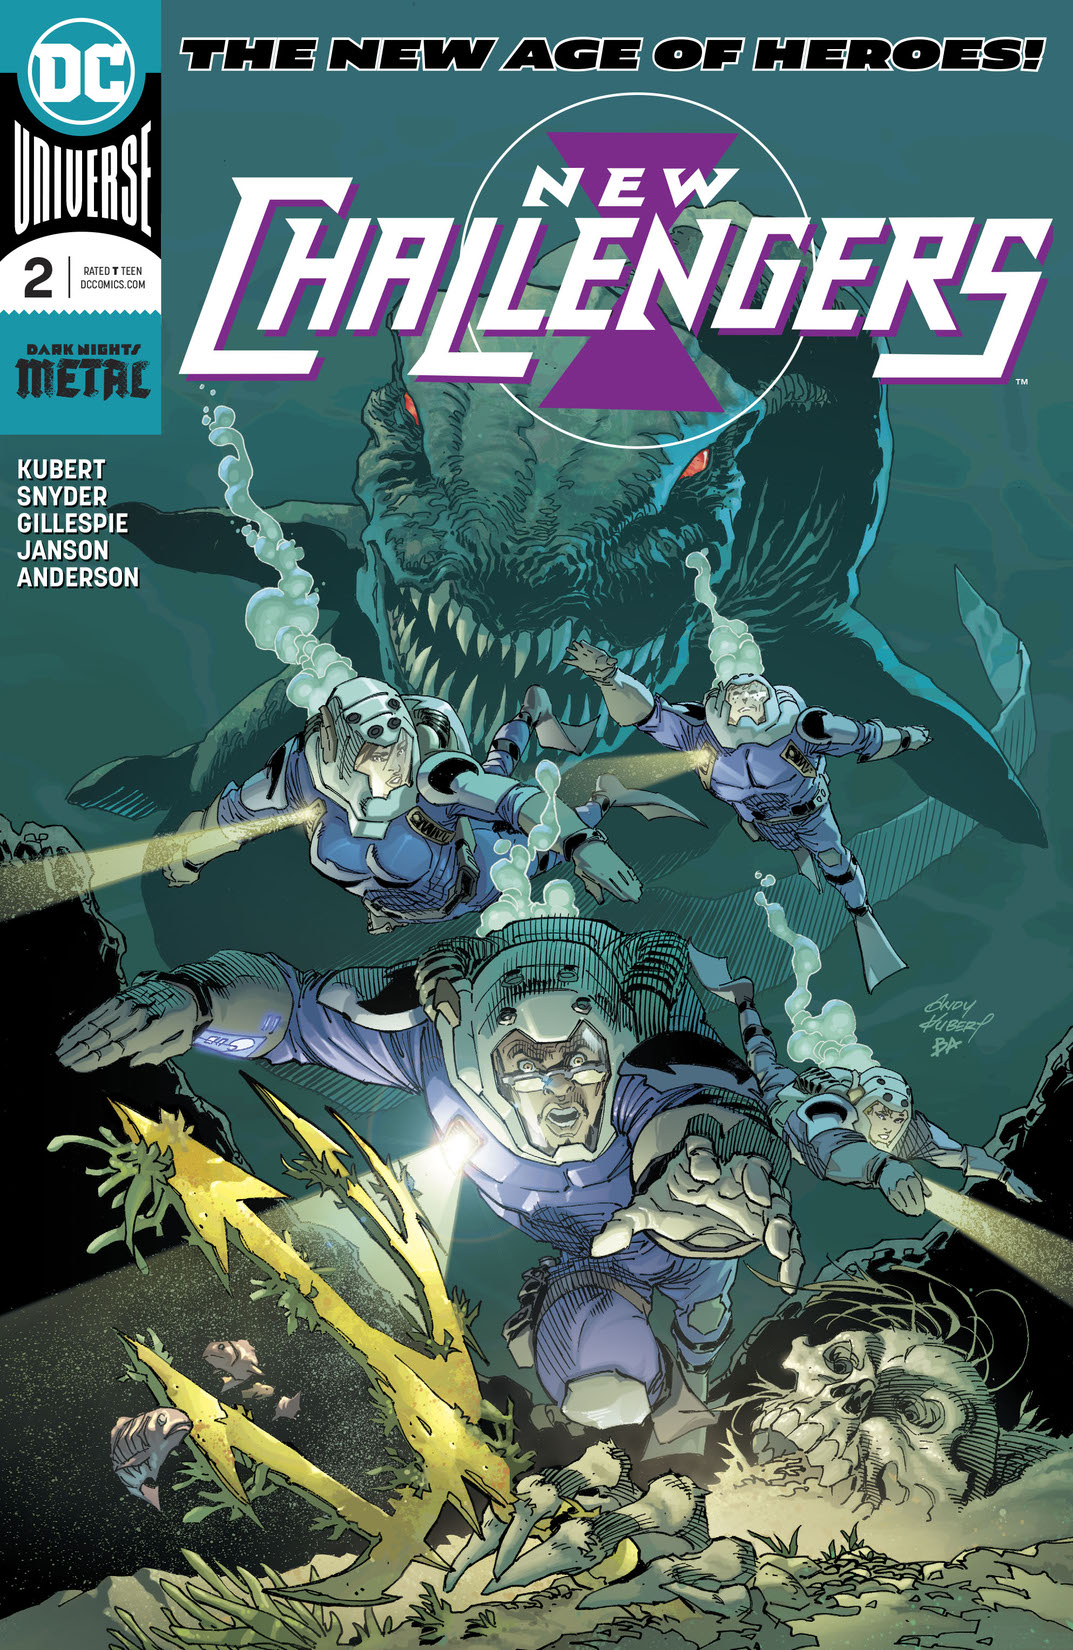 New Challengers #2 preview images